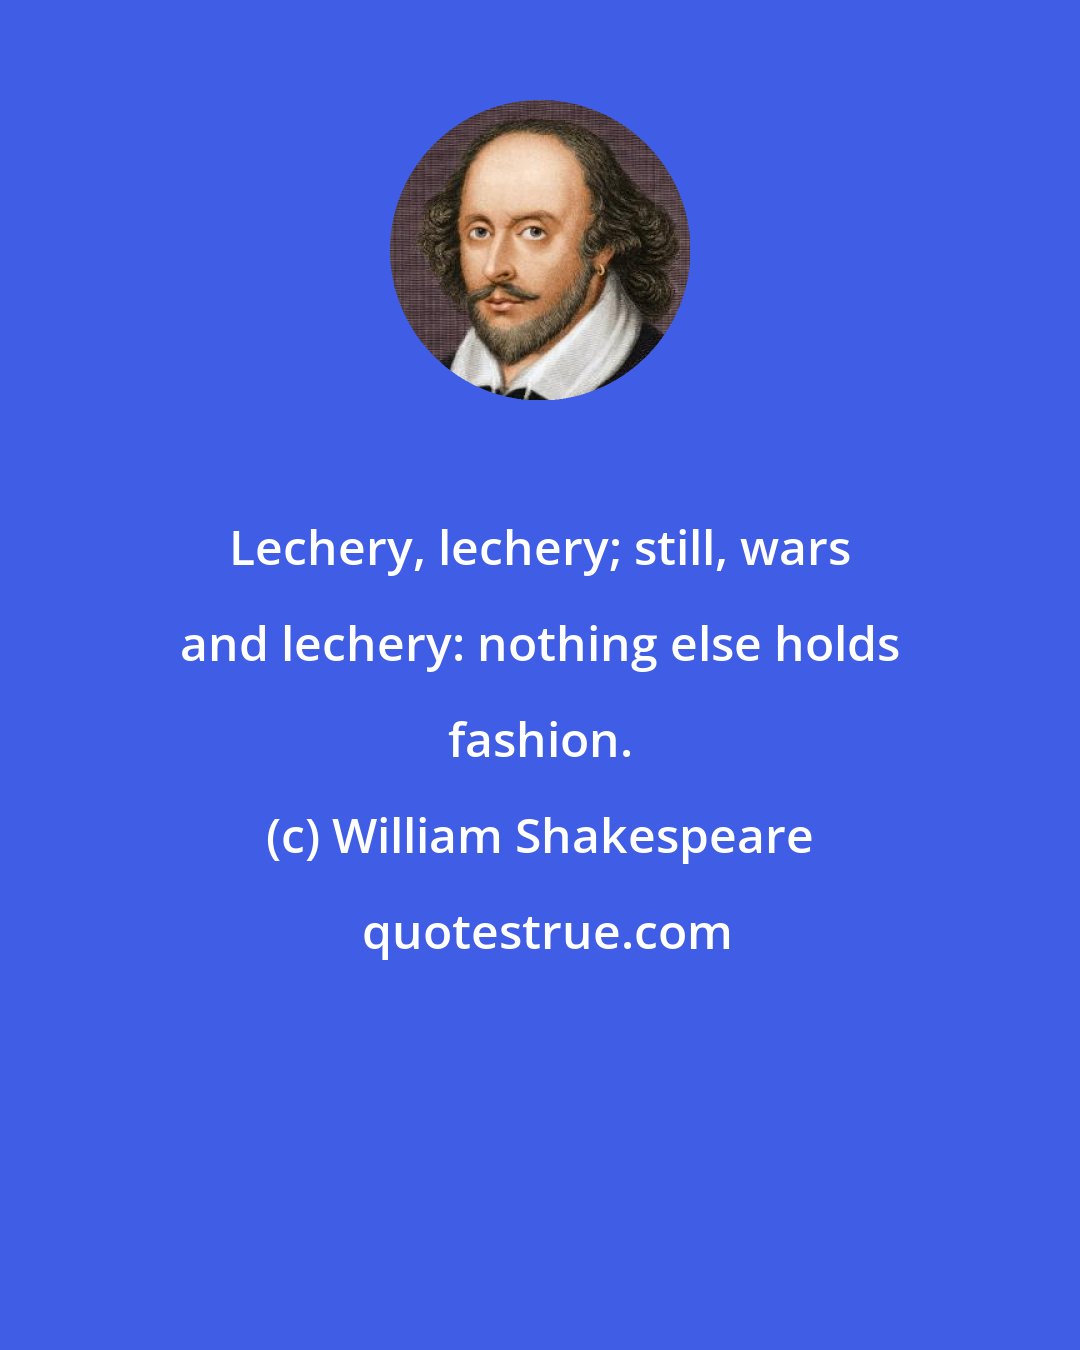 William Shakespeare: Lechery, lechery; still, wars and lechery: nothing else holds fashion.